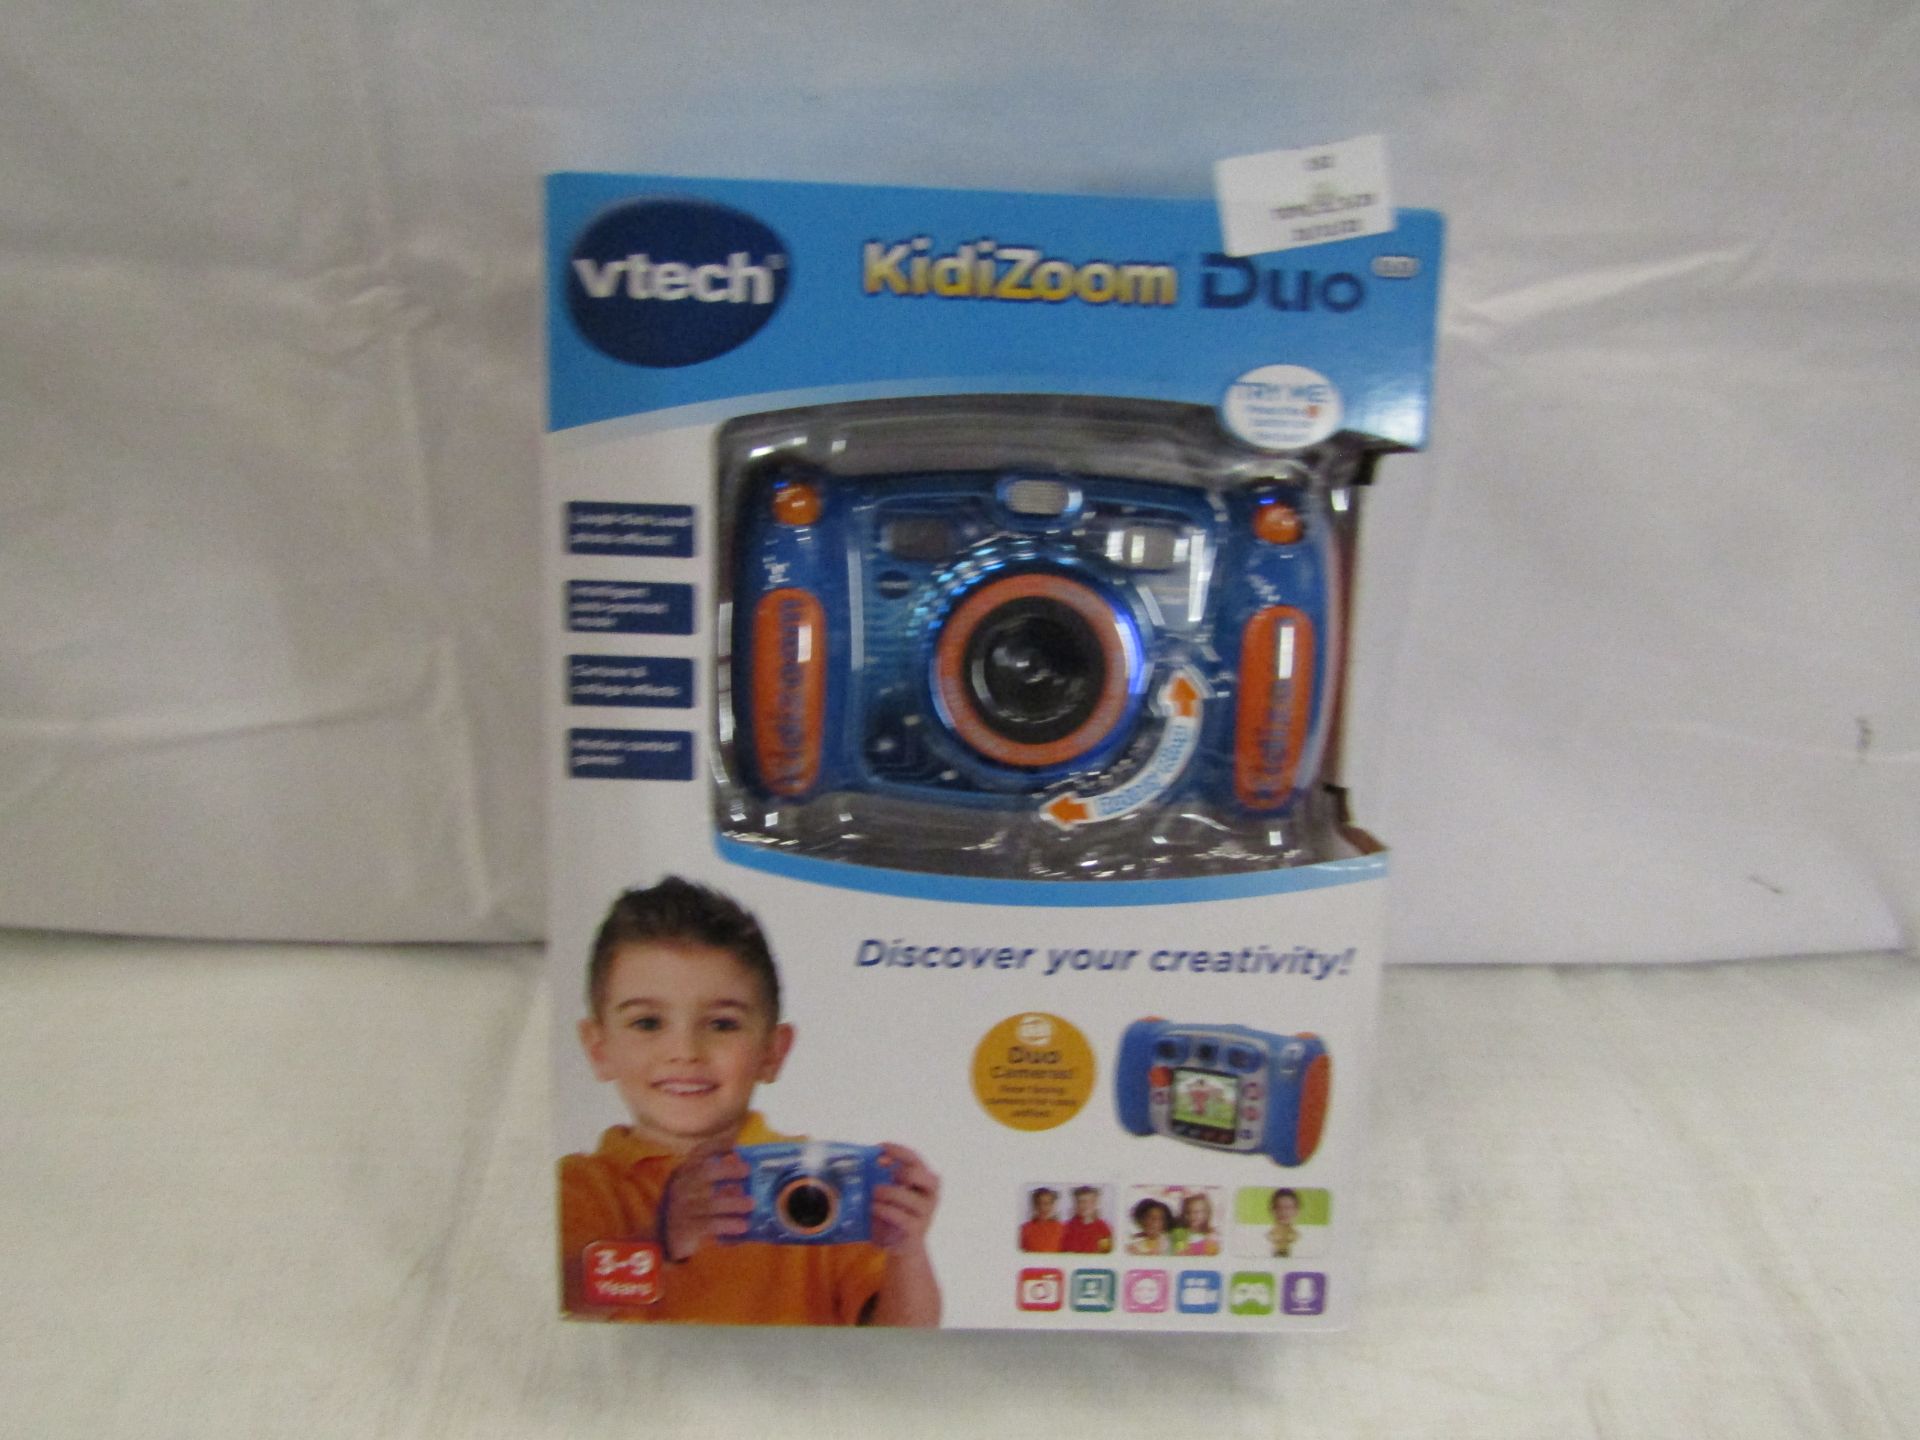 Vtech - Kidizoom Duo 5.0 Camera - Untested & Packaged.